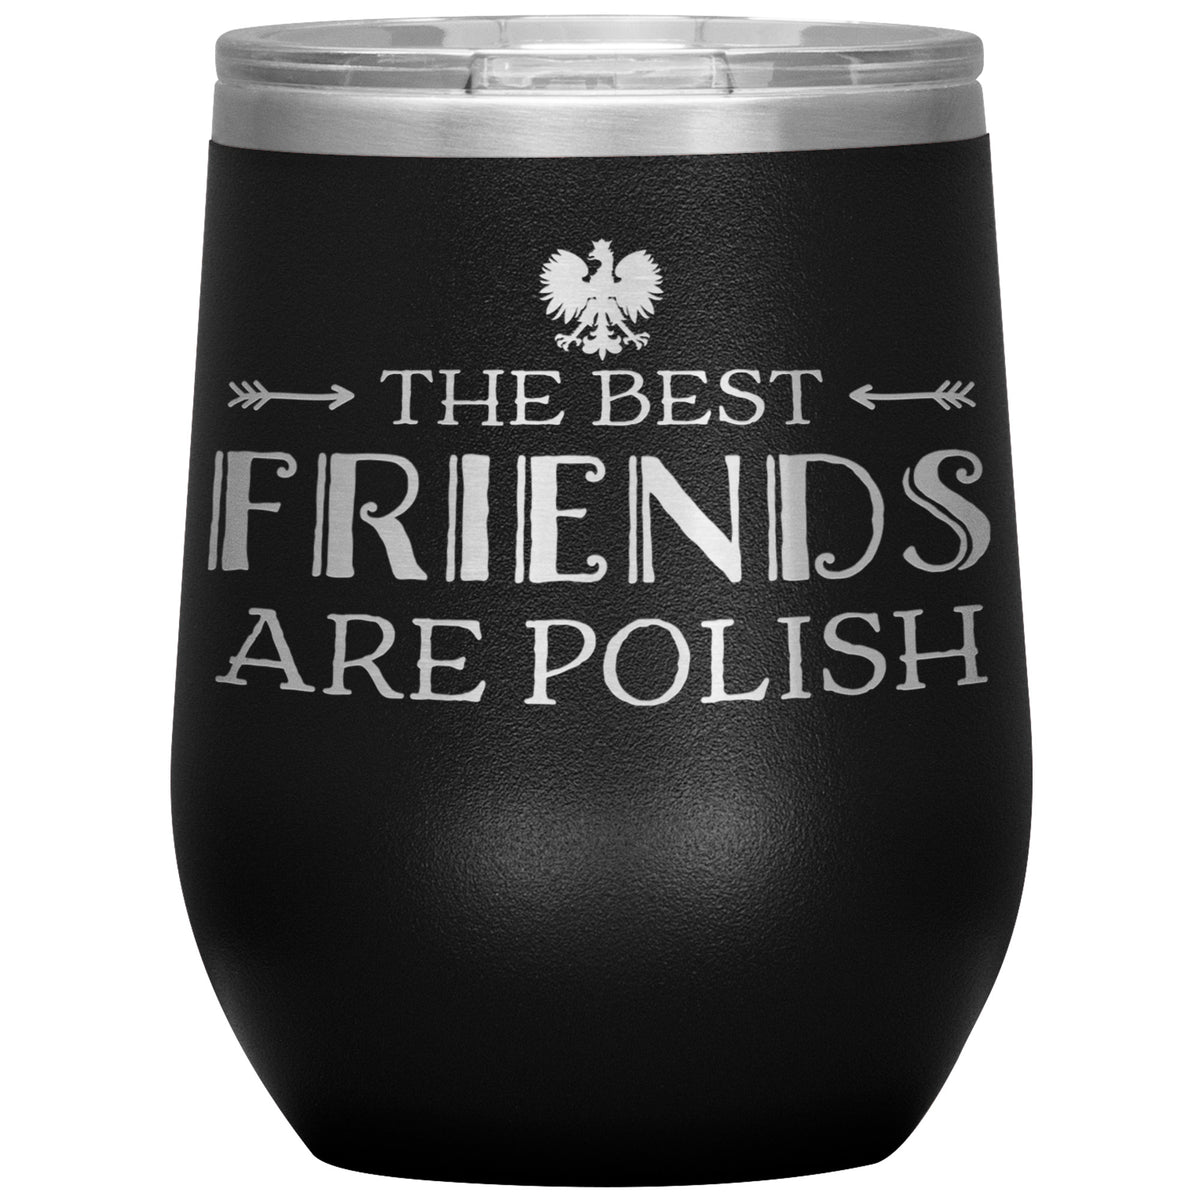 The Best Friends Are Polish Insulated Wine Tumbler Tumblers teelaunch Black  